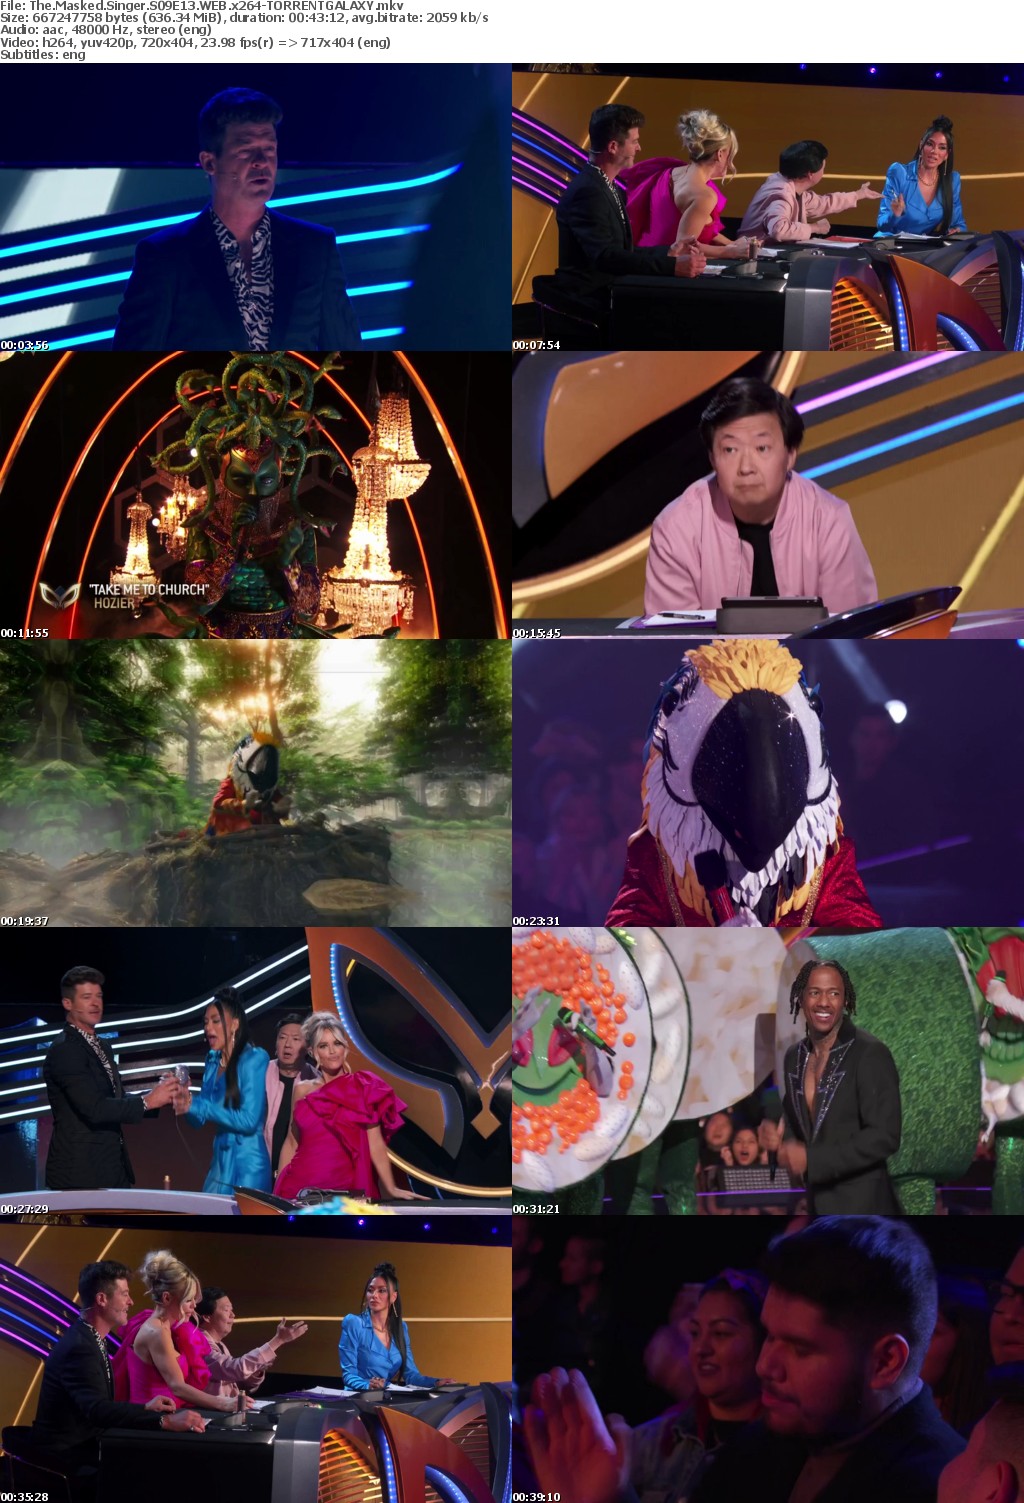 The Masked Singer S09E13 WEB x264-GALAXY